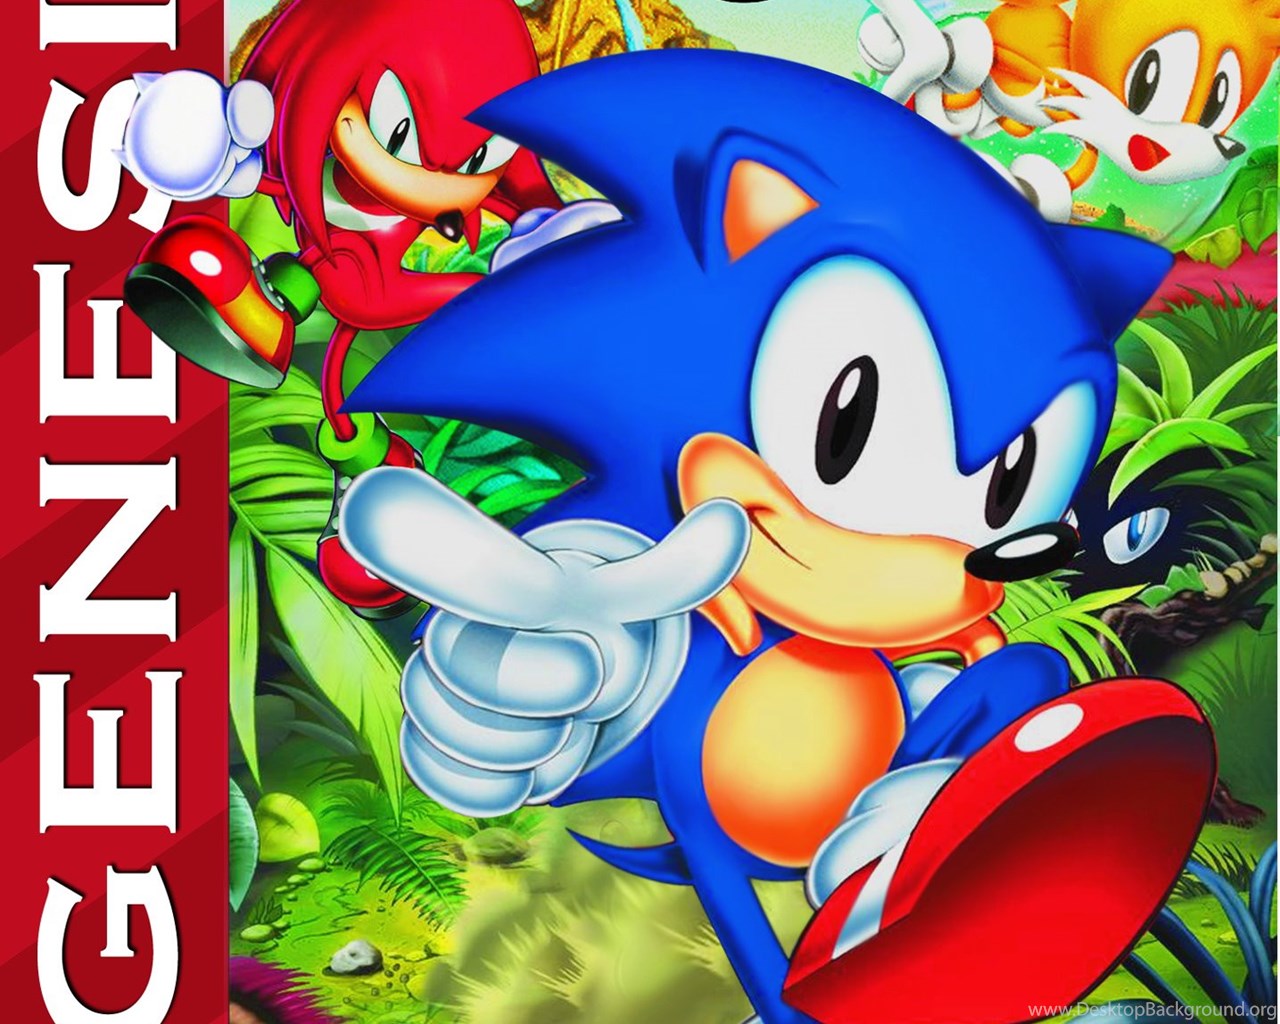 Sonic knuckles air. Игра Sonic the Hedgehog 3. Sonic the Hedgehog 3 НАКЛЗ. Sonic & Knuckles (Соник & НАКЛЗ), 1994. Sonic 3 and Knuckles.